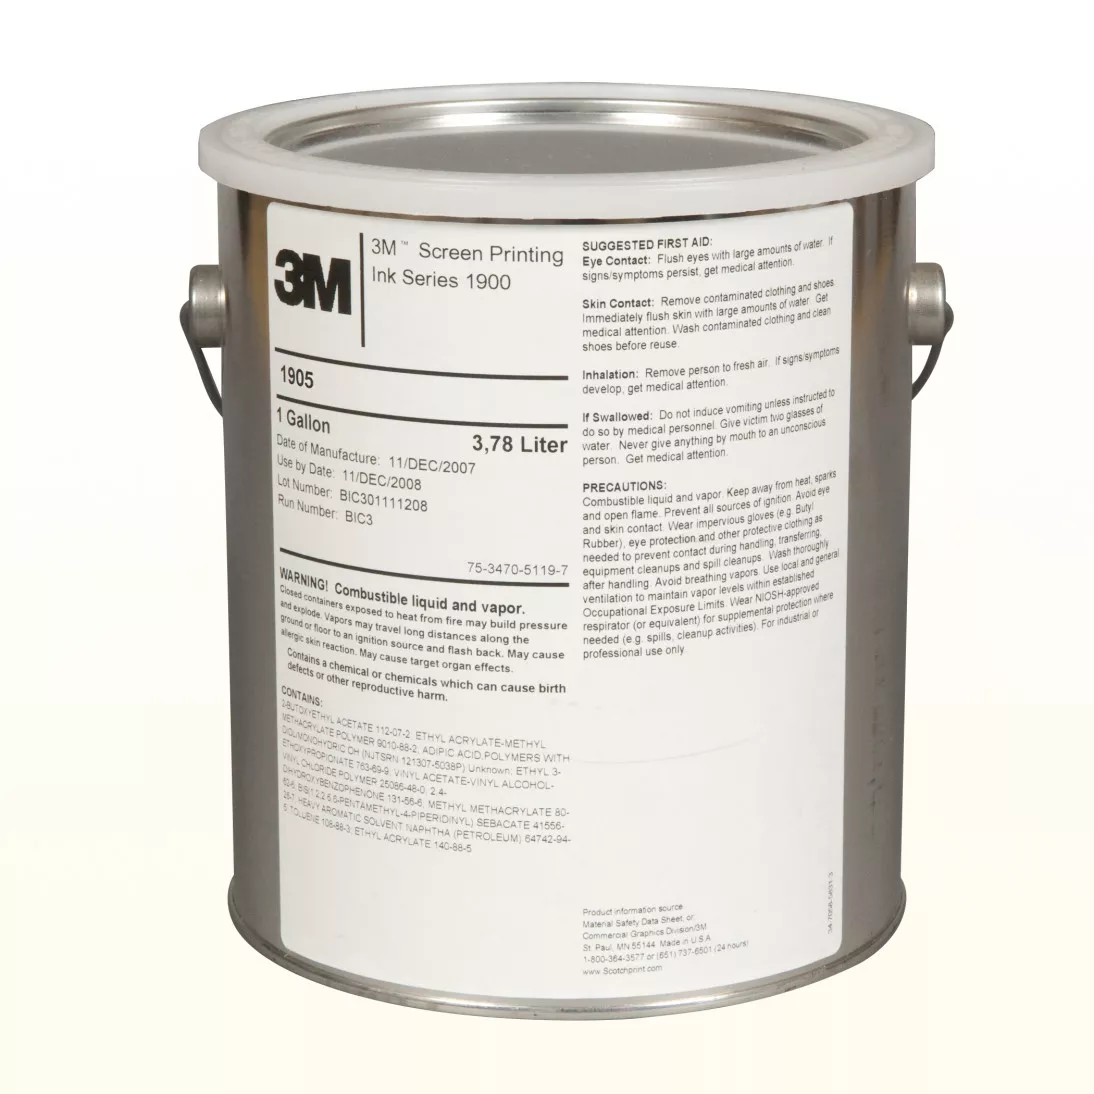 3M™ Screen Printing Ink 1905, Black, 1 Gallon Container